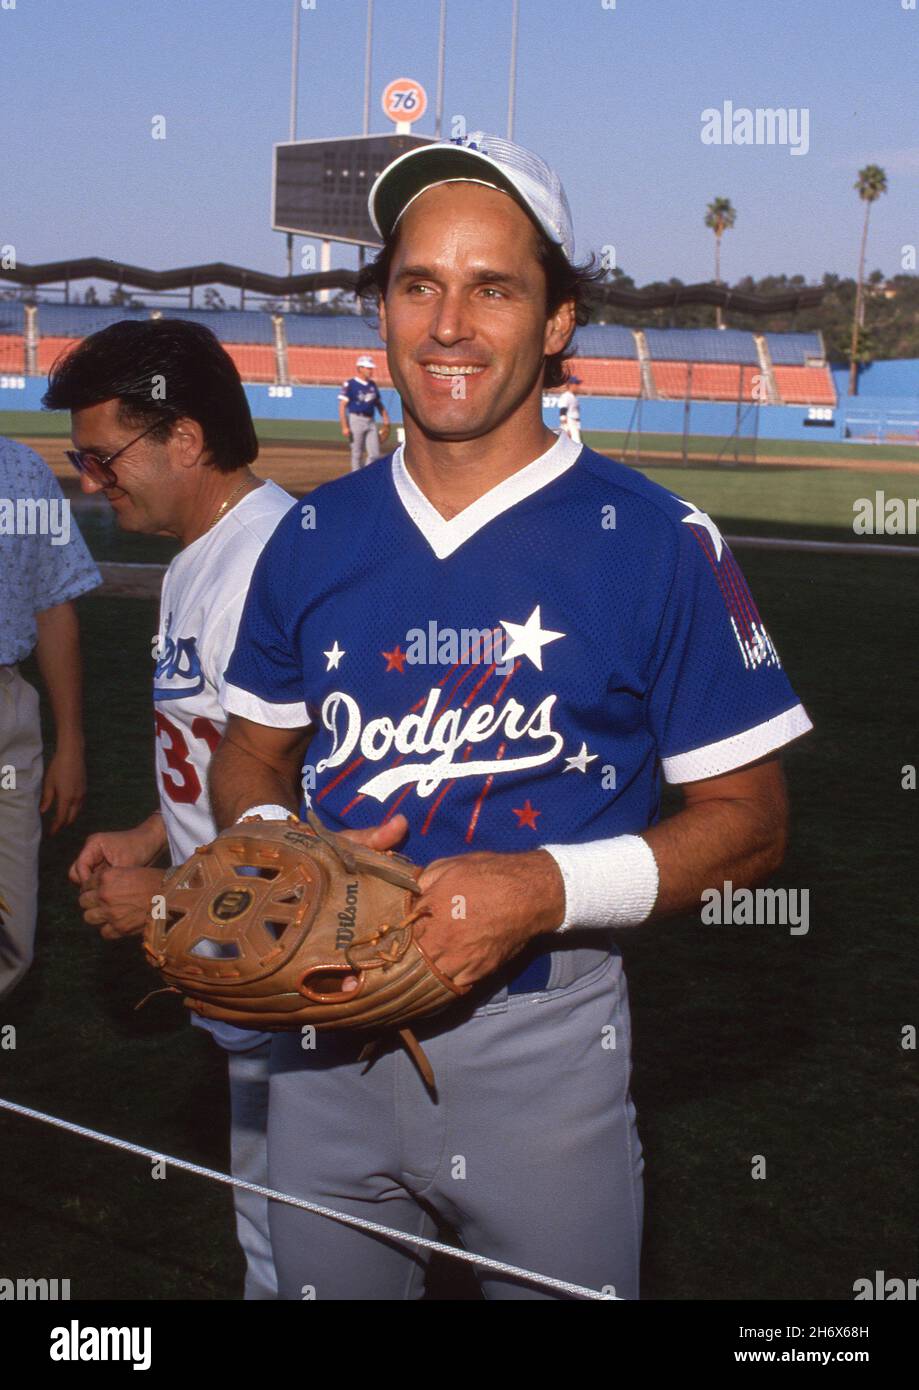 Gregory Harrison at the 30th Annual 'Hollywood Stars Night' Celebrity  Baseball Game on August 20, 1988 at Dodger Stadium in Los Angeles,  California Credit: Ralph Dominguez/MediaPunch Stock Photo - Alamy